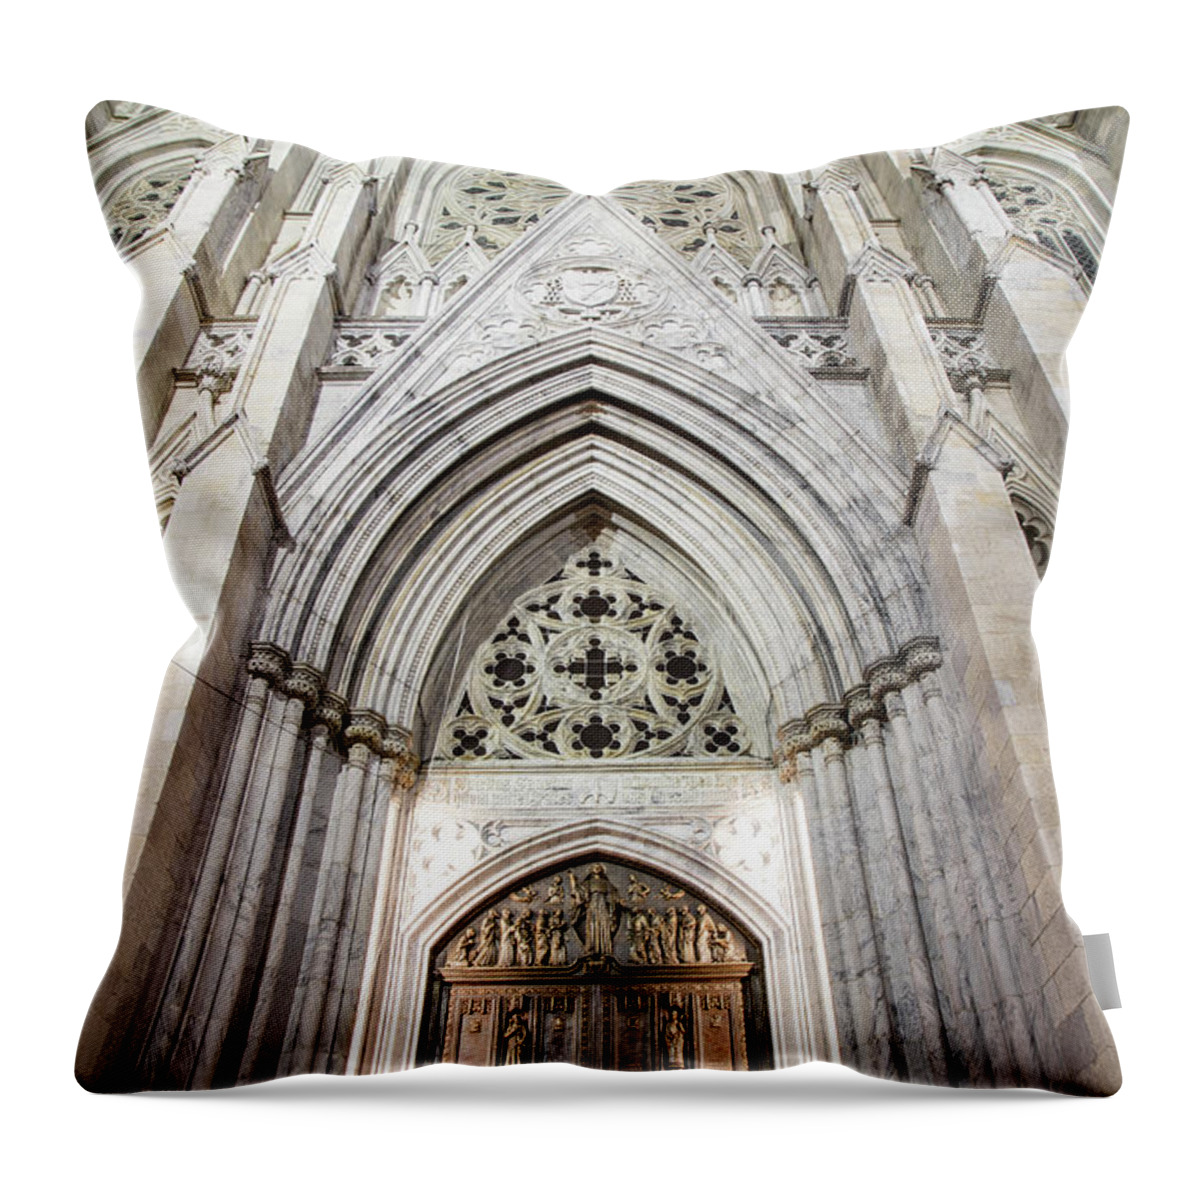 Nyc Throw Pillow featuring the photograph St Patrick's Cathedral Door by John McGraw